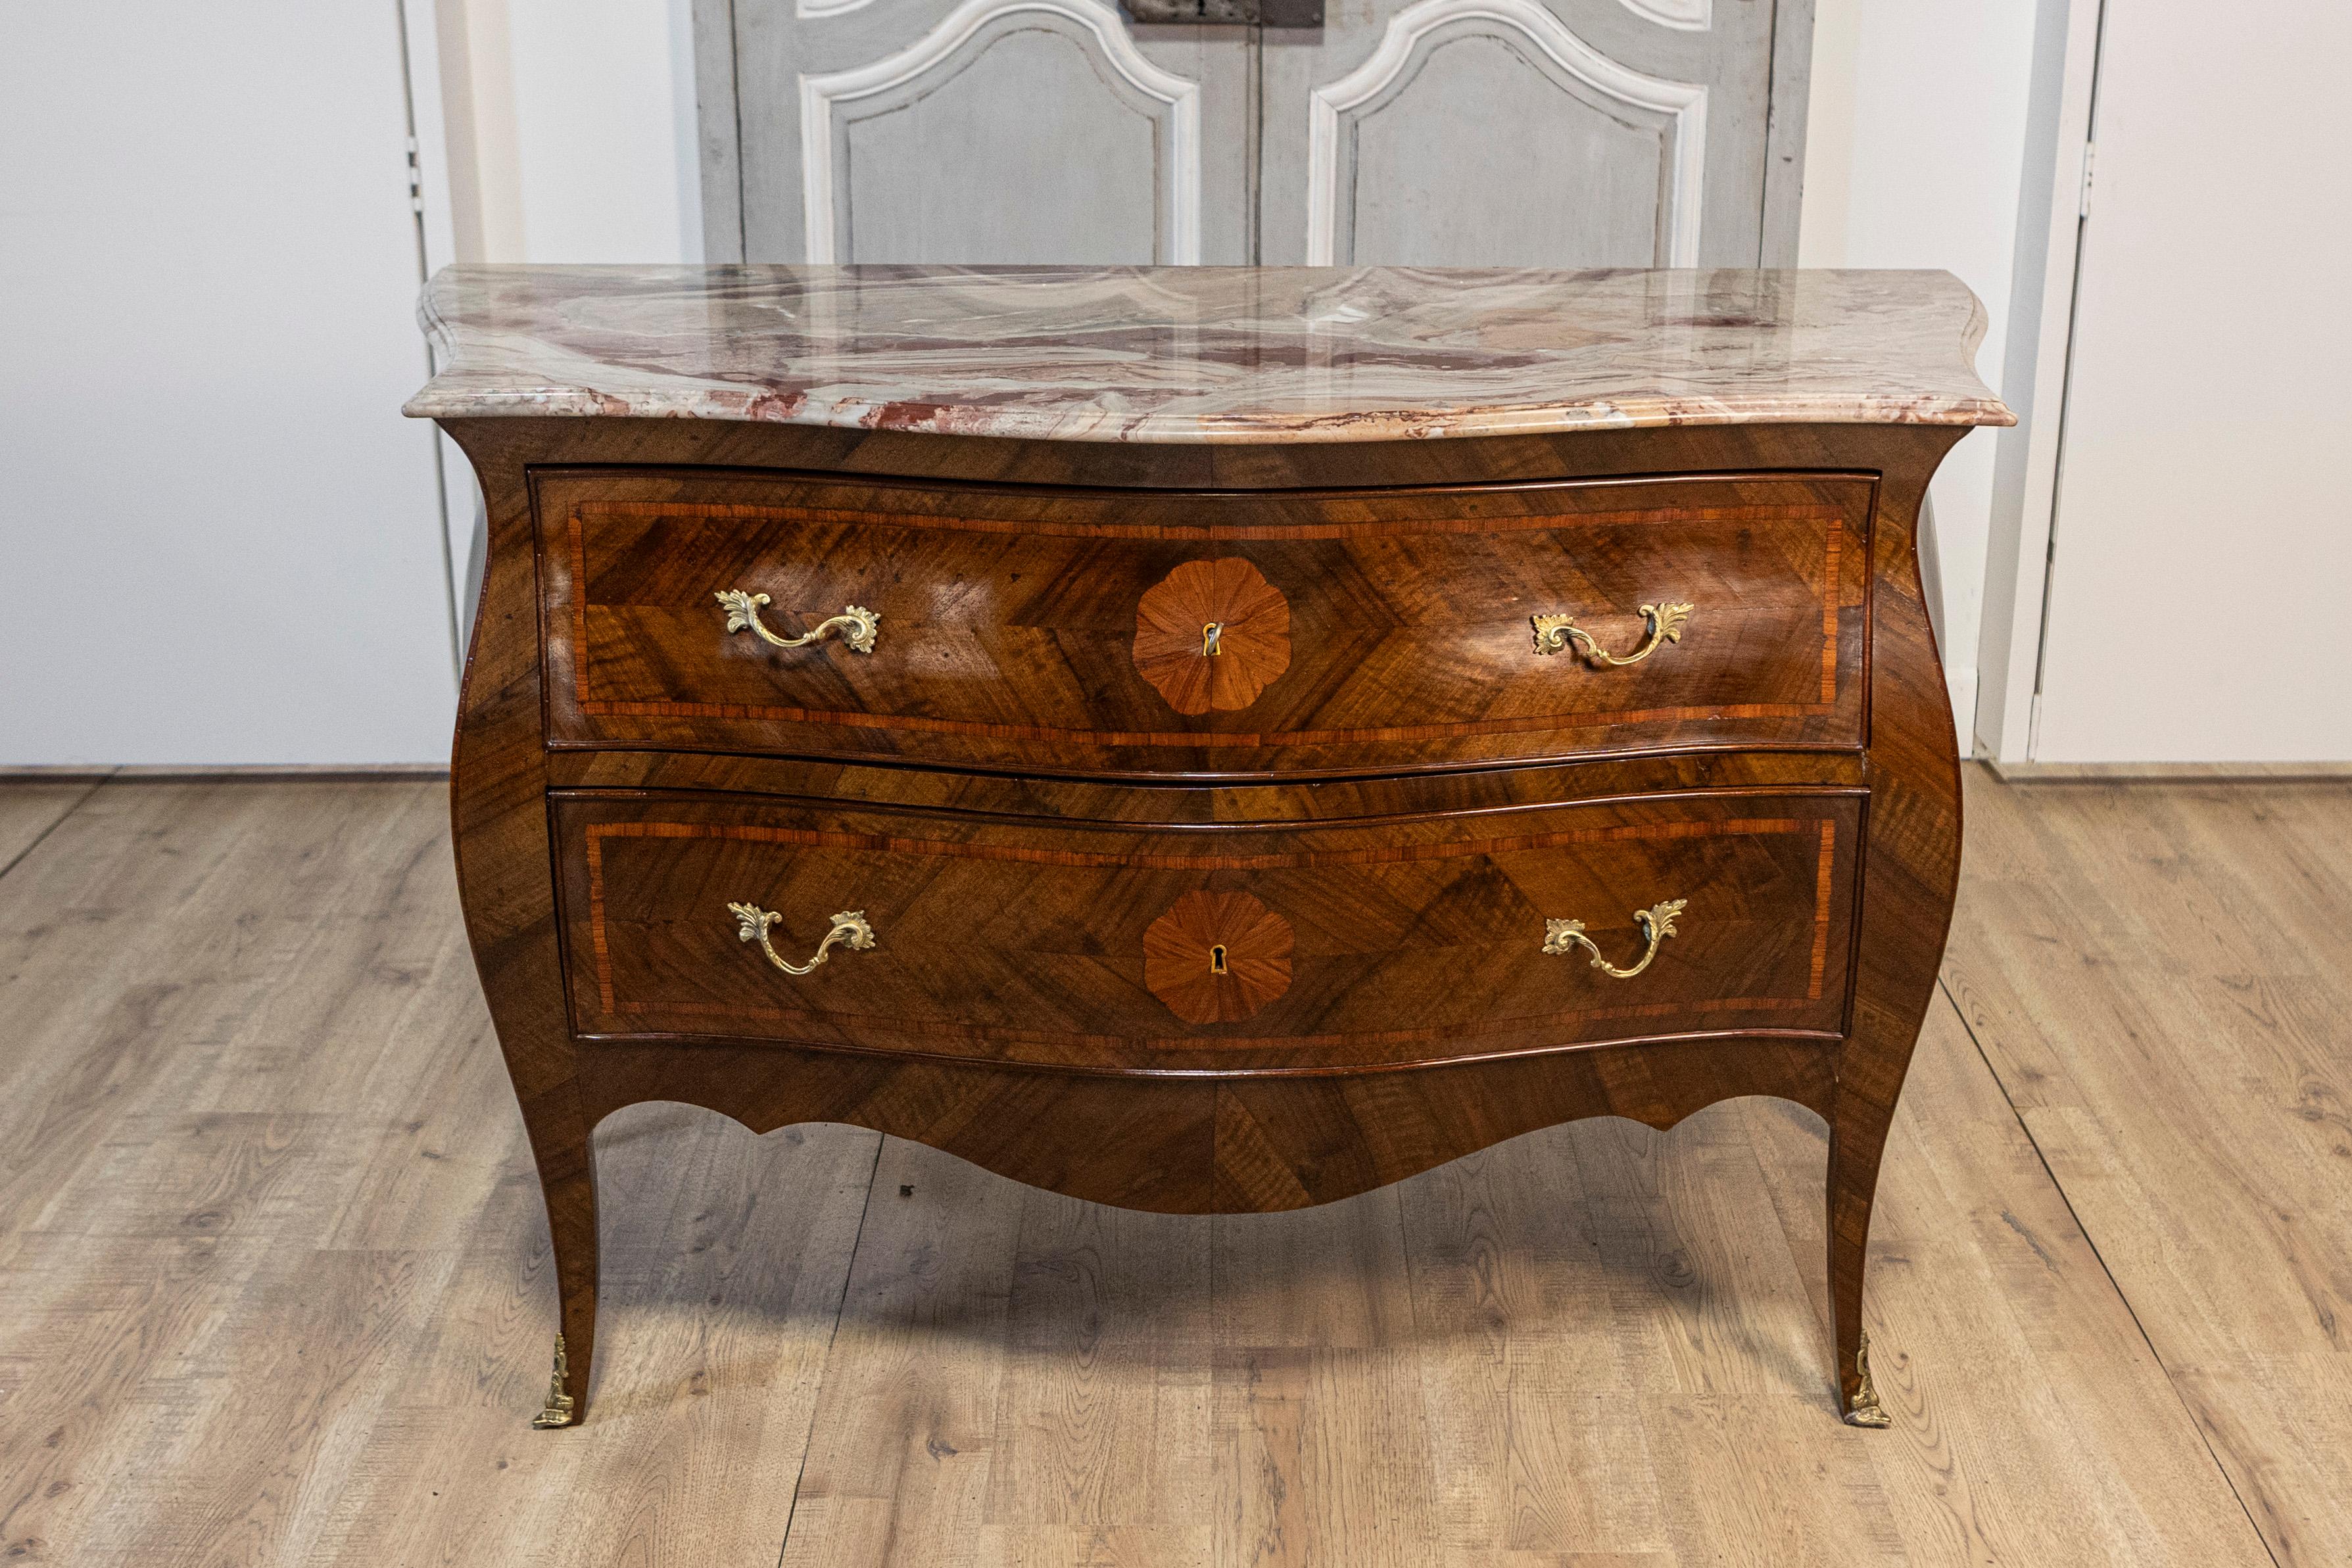 A pair of Rococo style walnut and mahogany bombé commodes from circa 1900 with marble tops and bronze hardware. This exquisite pair of Rococo style bombé commodes, crafted around 1900, elegantly combines walnut and mahogany woods with sophisticated